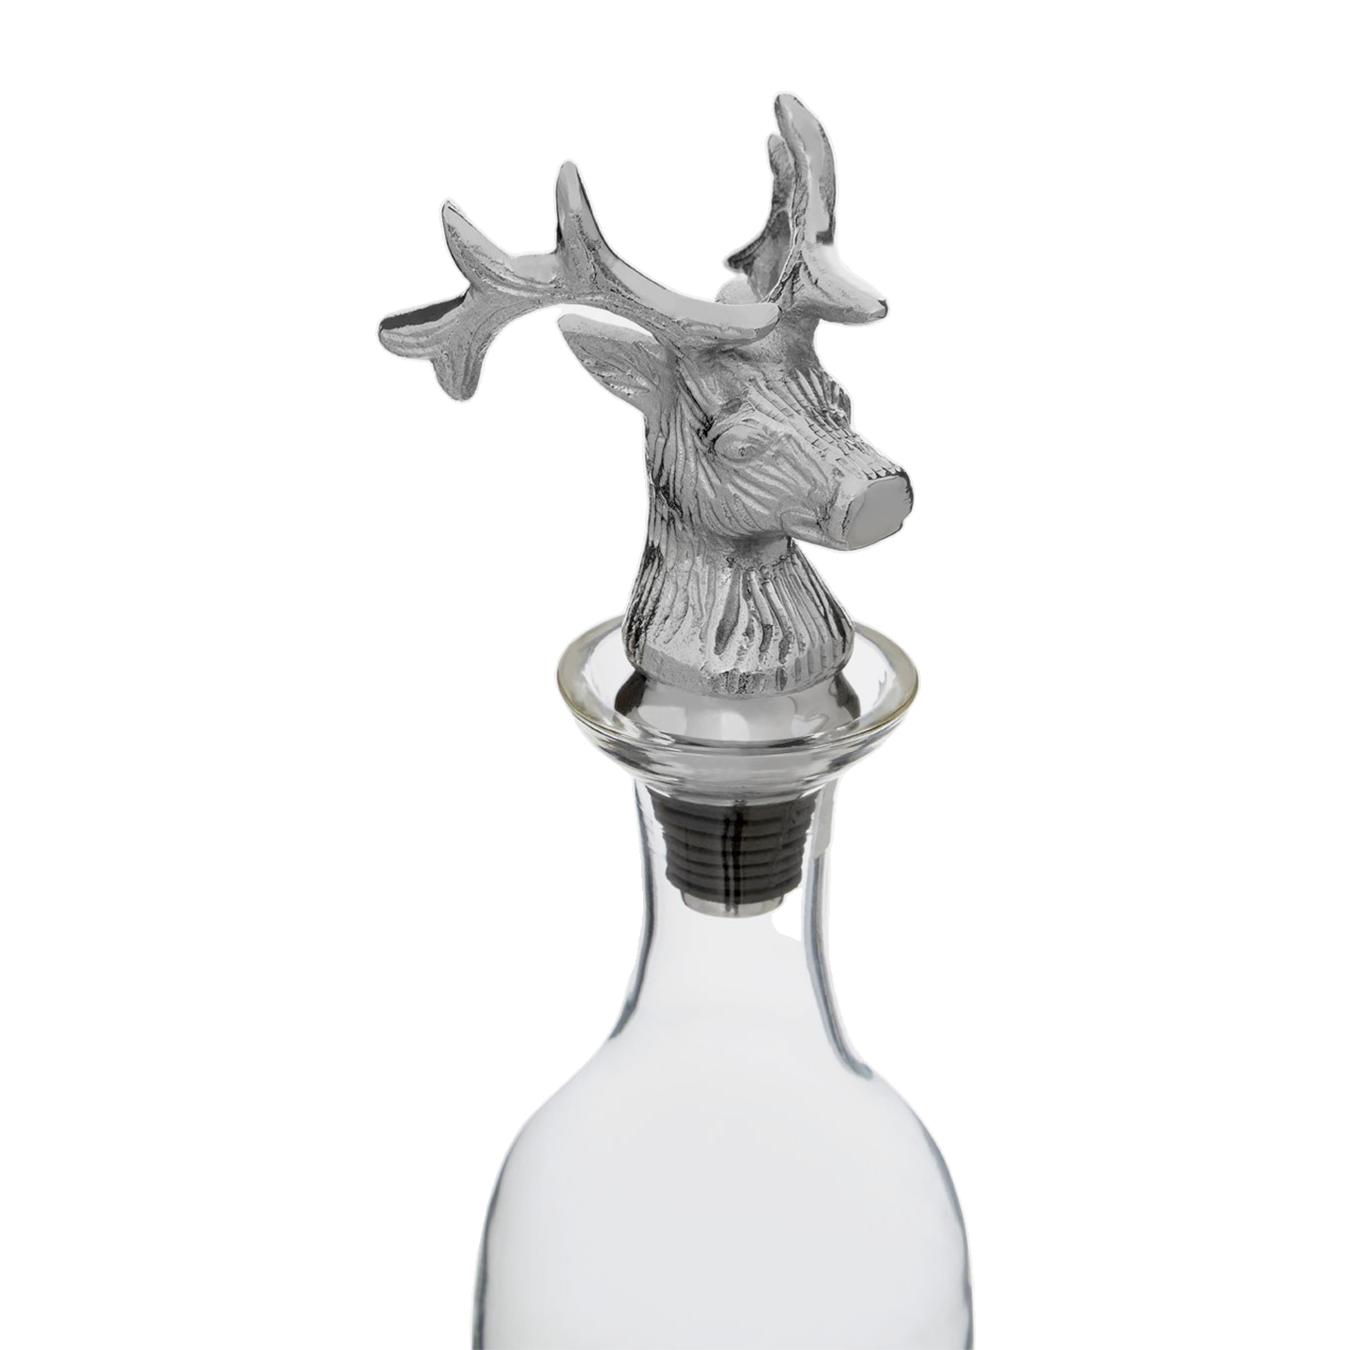 Stag Head Decanter